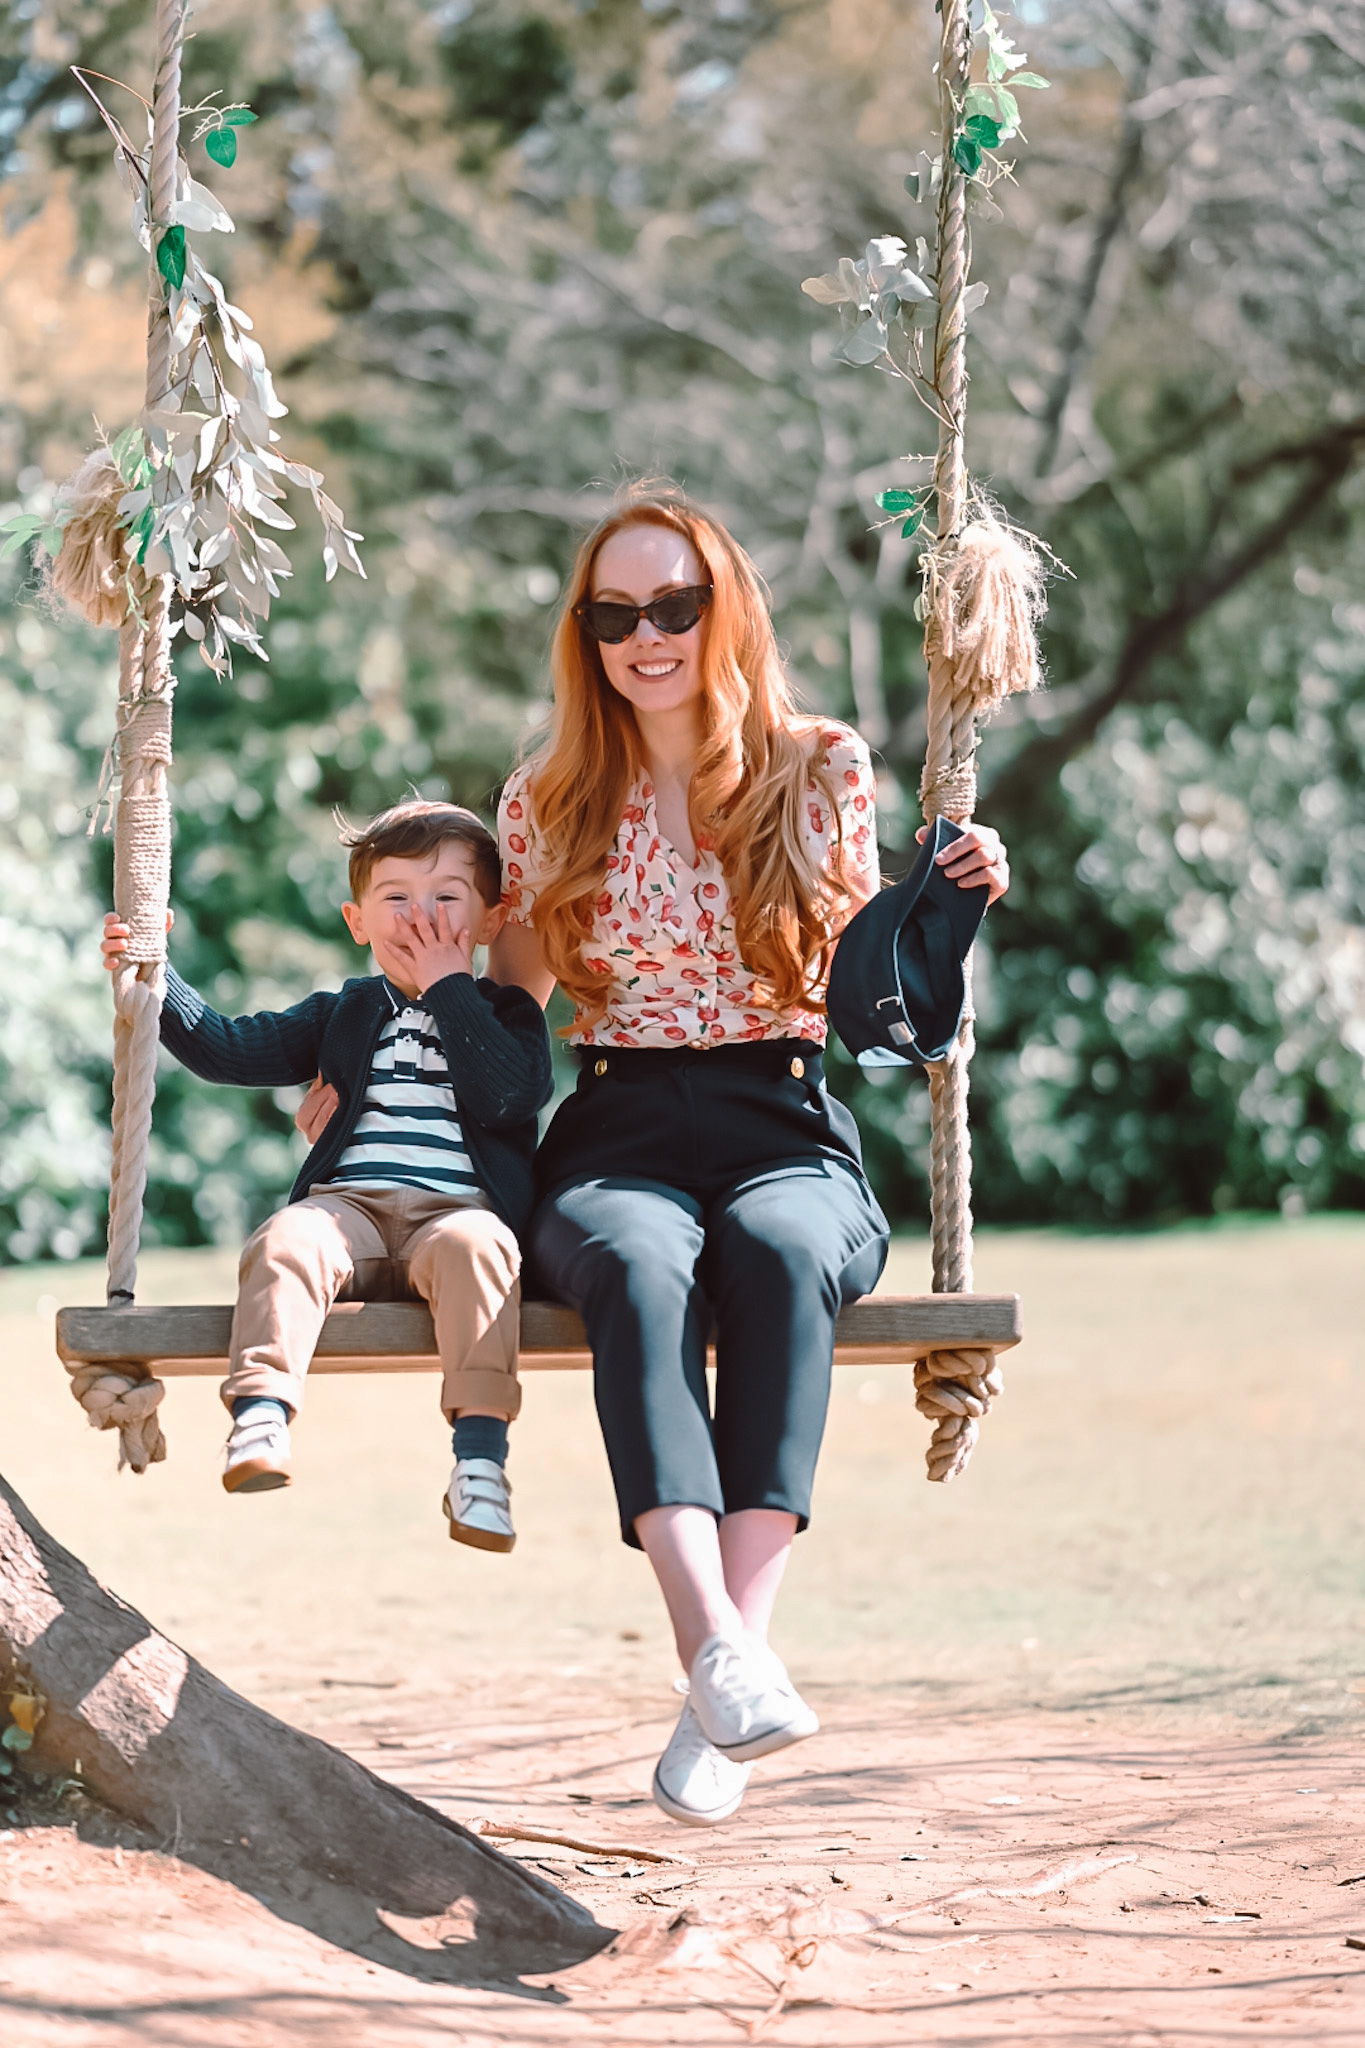 Max and Amber on a tree swing, April 2021